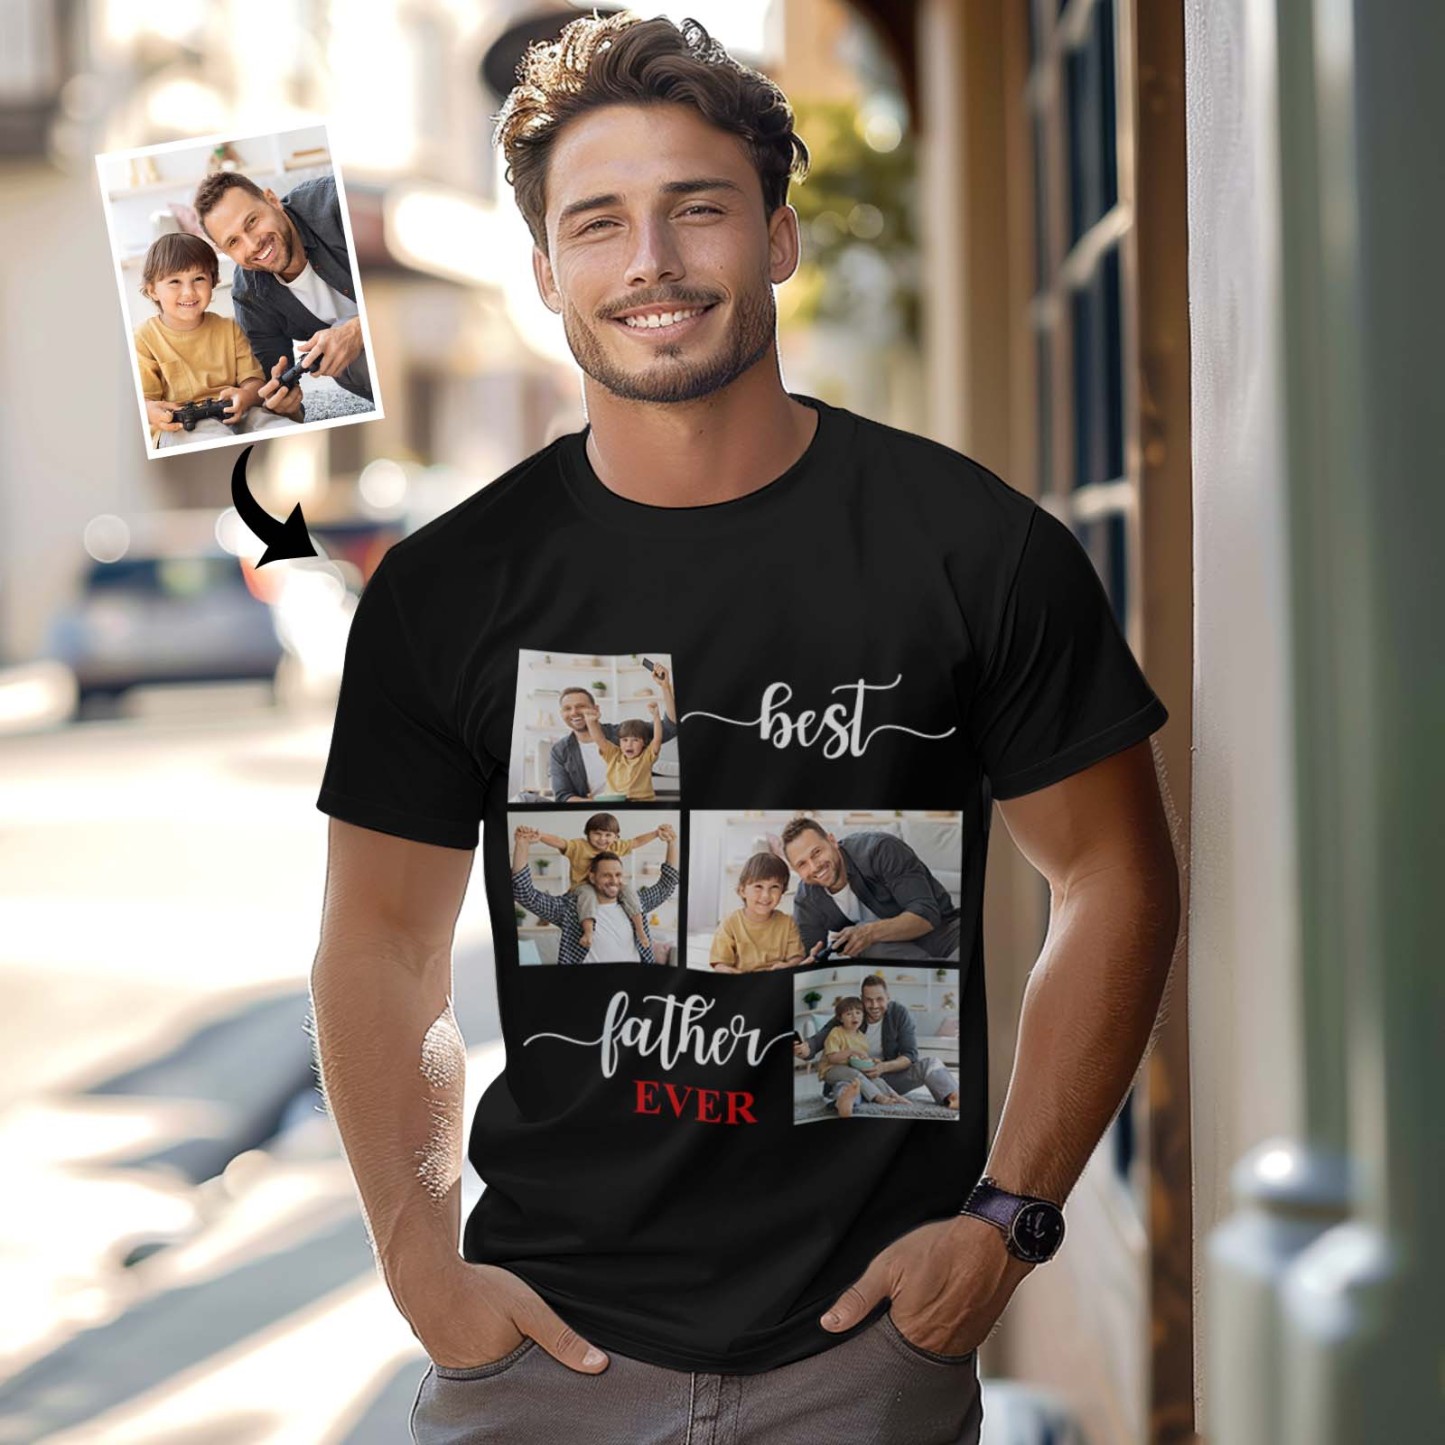 Custom 4 Photos T-Shirt Personalized Photo T-Shirt Best Father Ever Father's Day Gift Family T-Shirt - GetPhotoSocksUk